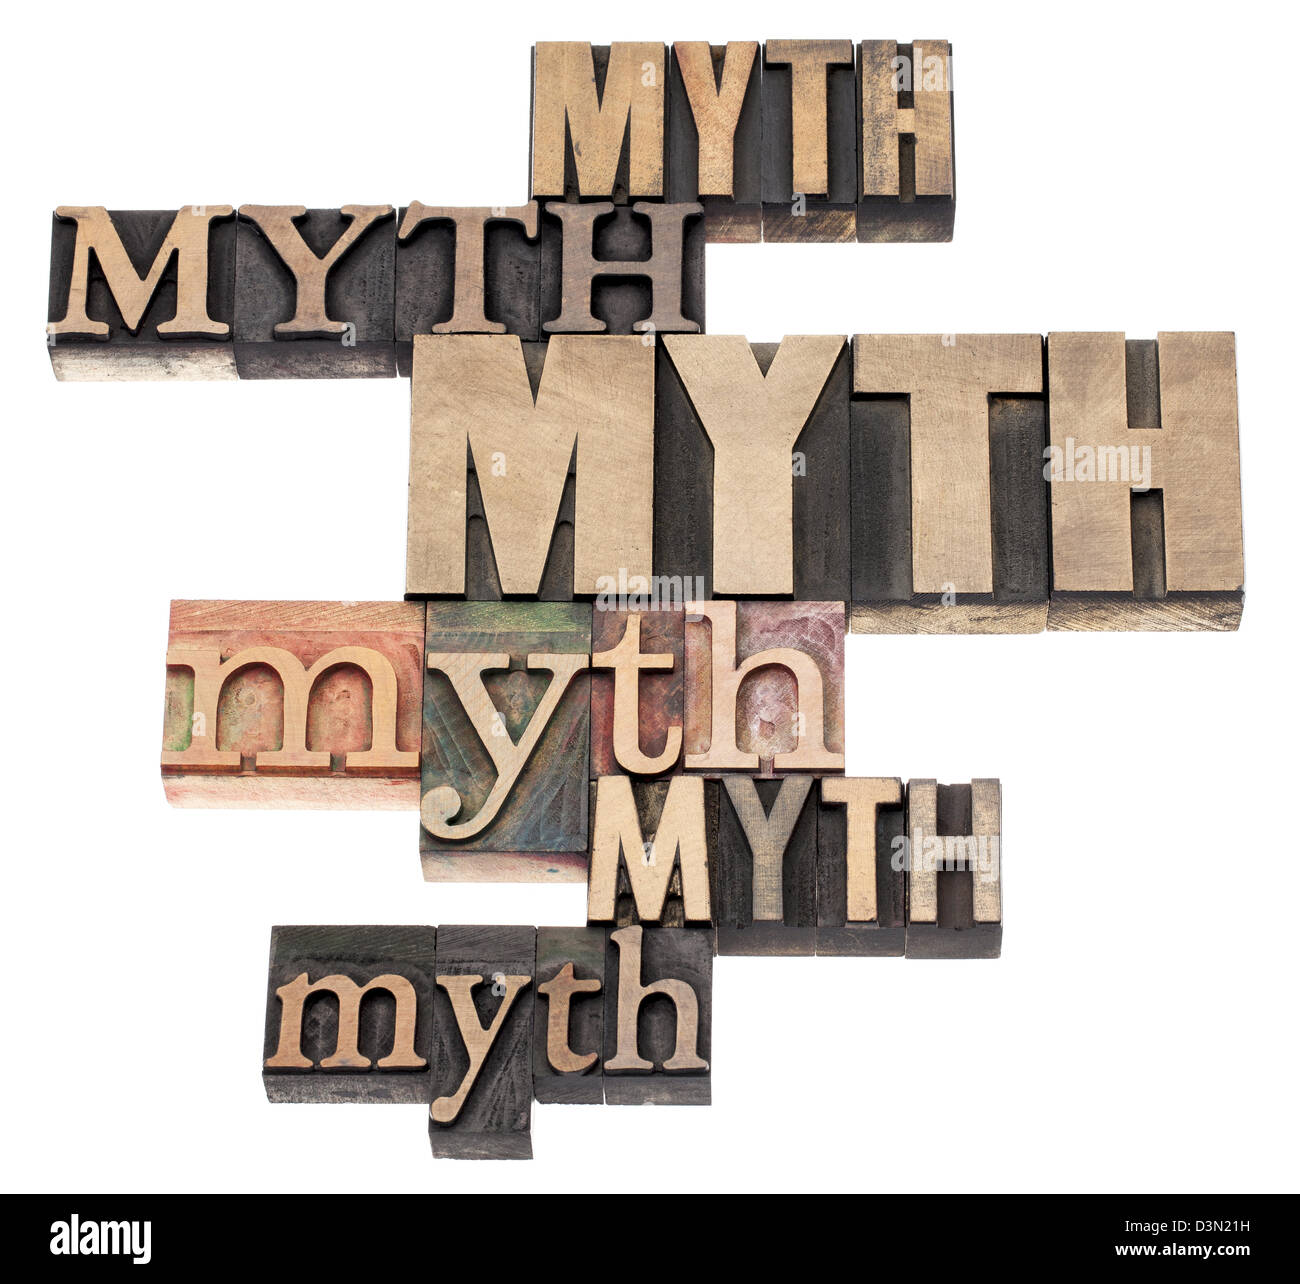 myth word abstract - isolated text in a variety of vintage letterpress wood type printing blocks Stock Photo